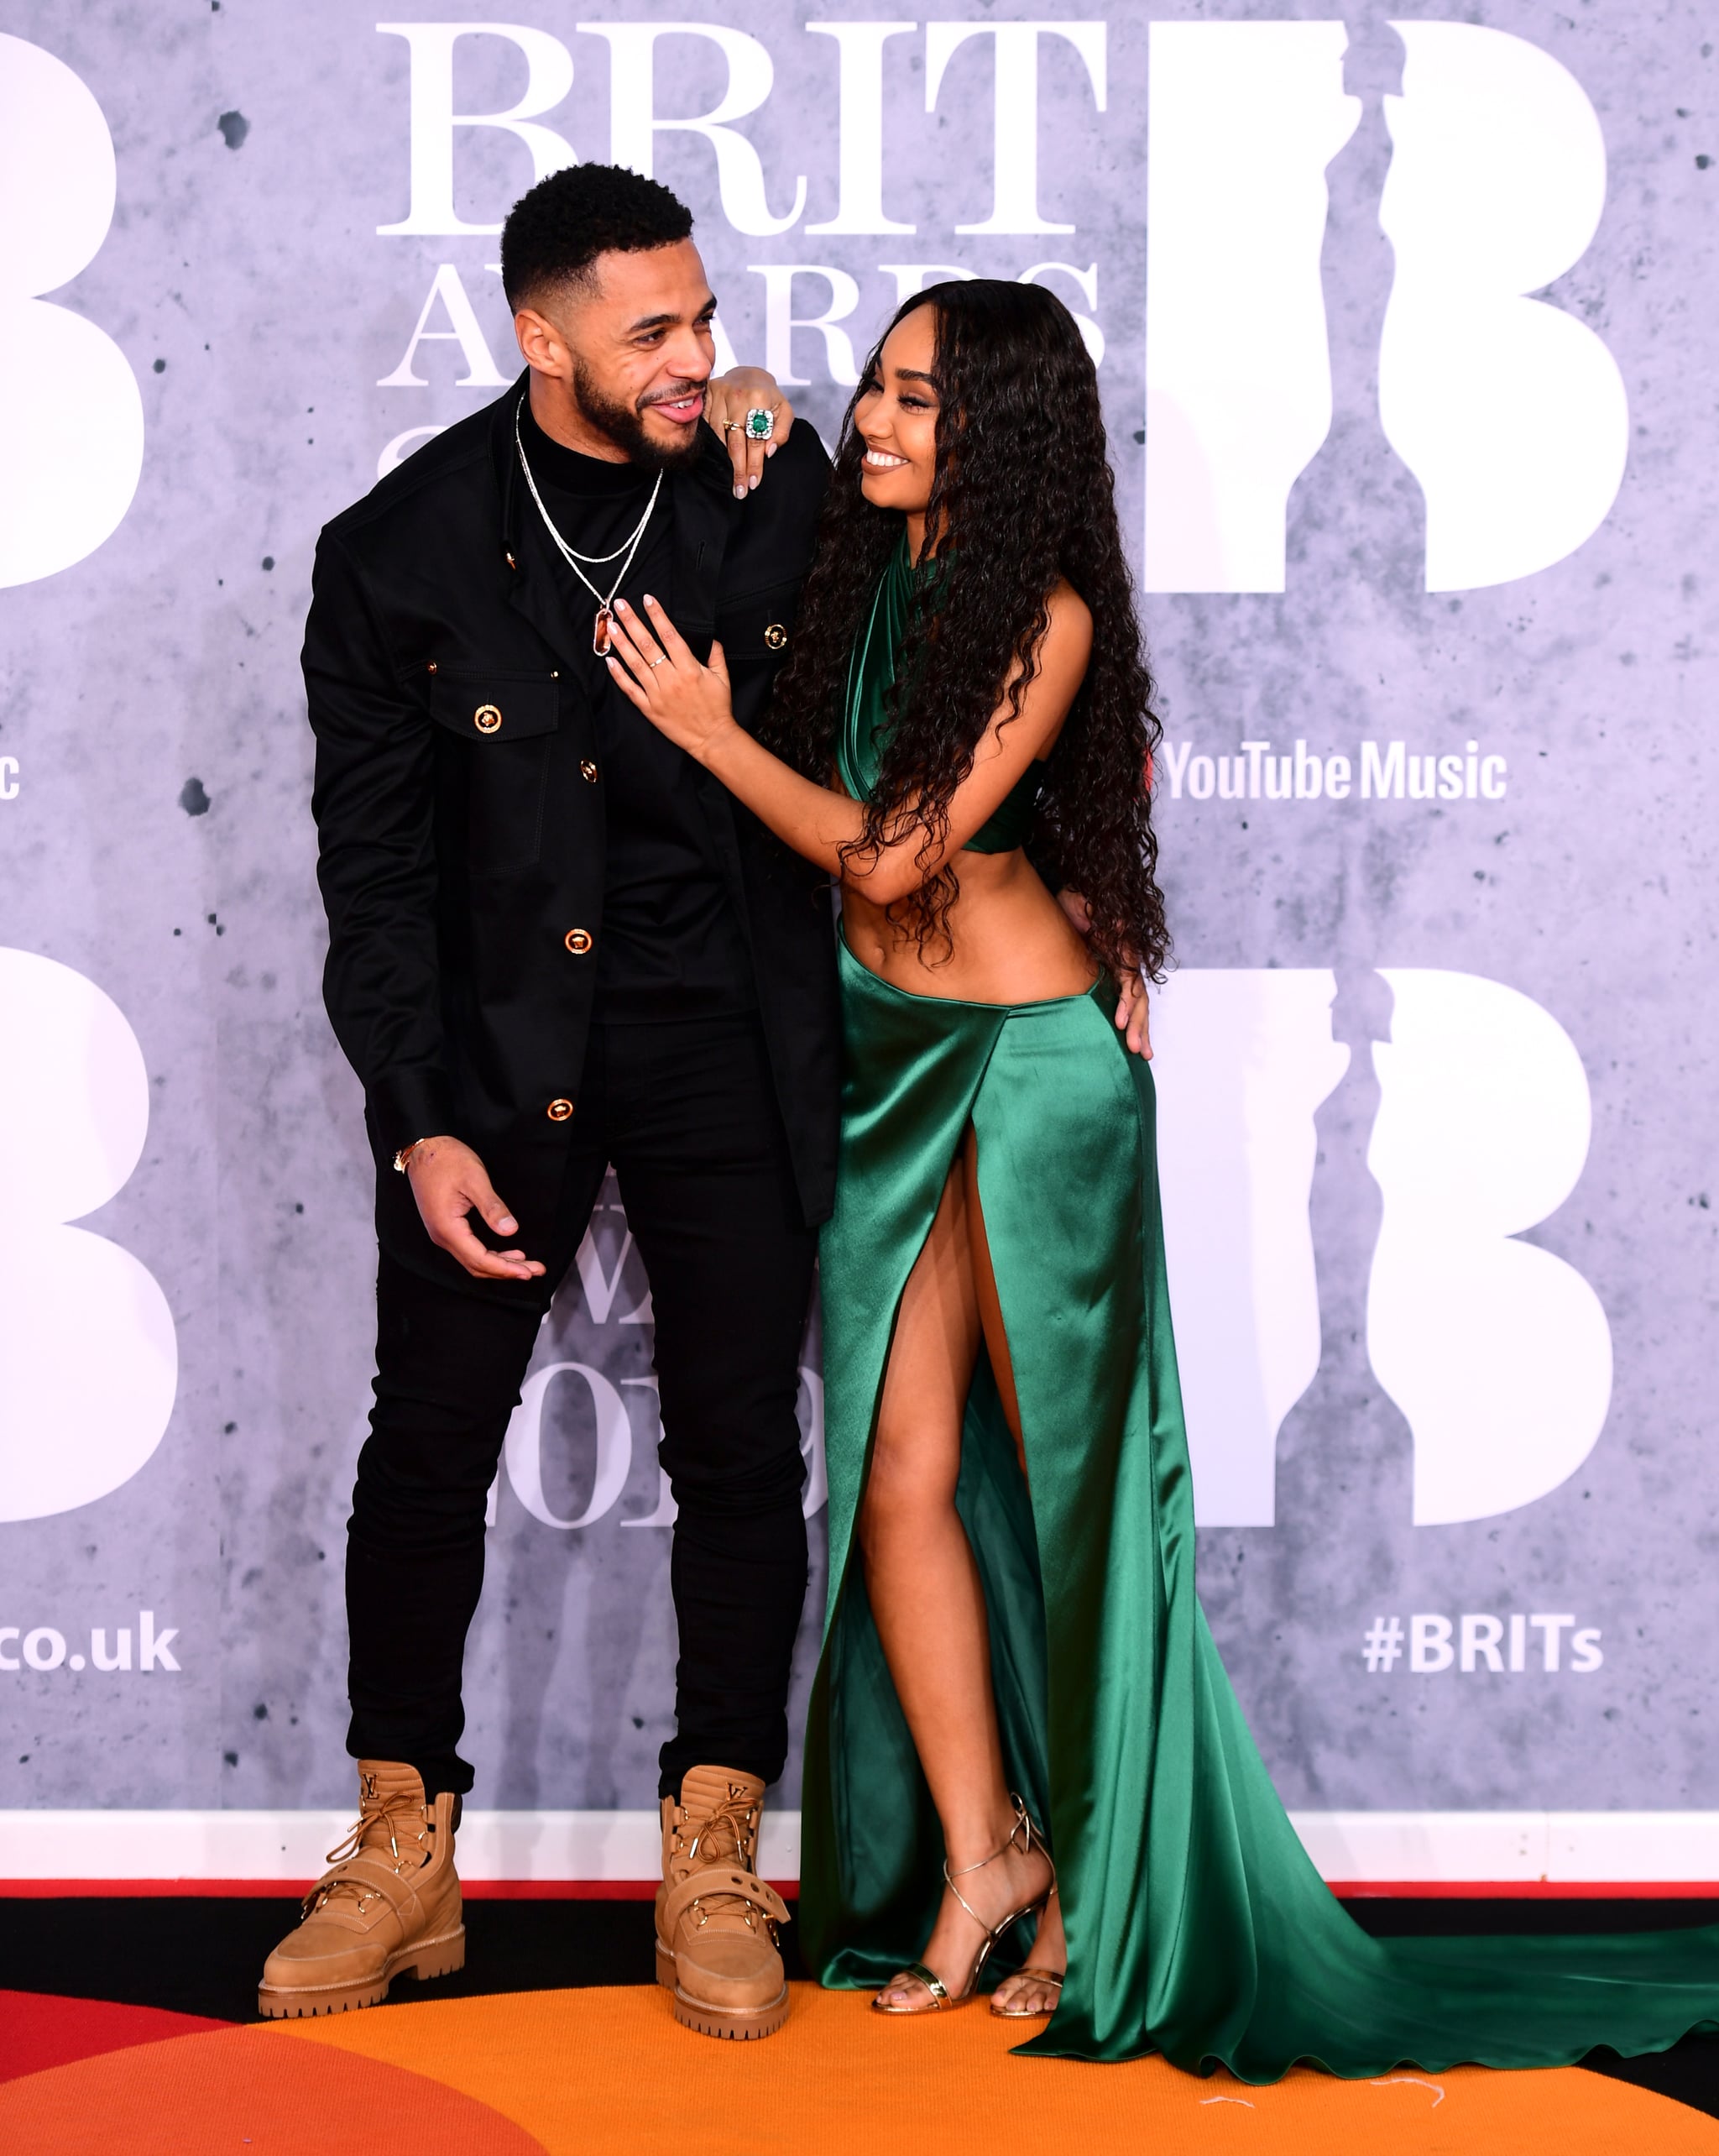 Andre Gray and Leigh-Anne Pinnock attending the Brit Awards 2019 at the O2 Arena, London. (Photo by Ian West/PA Images via Getty Images)